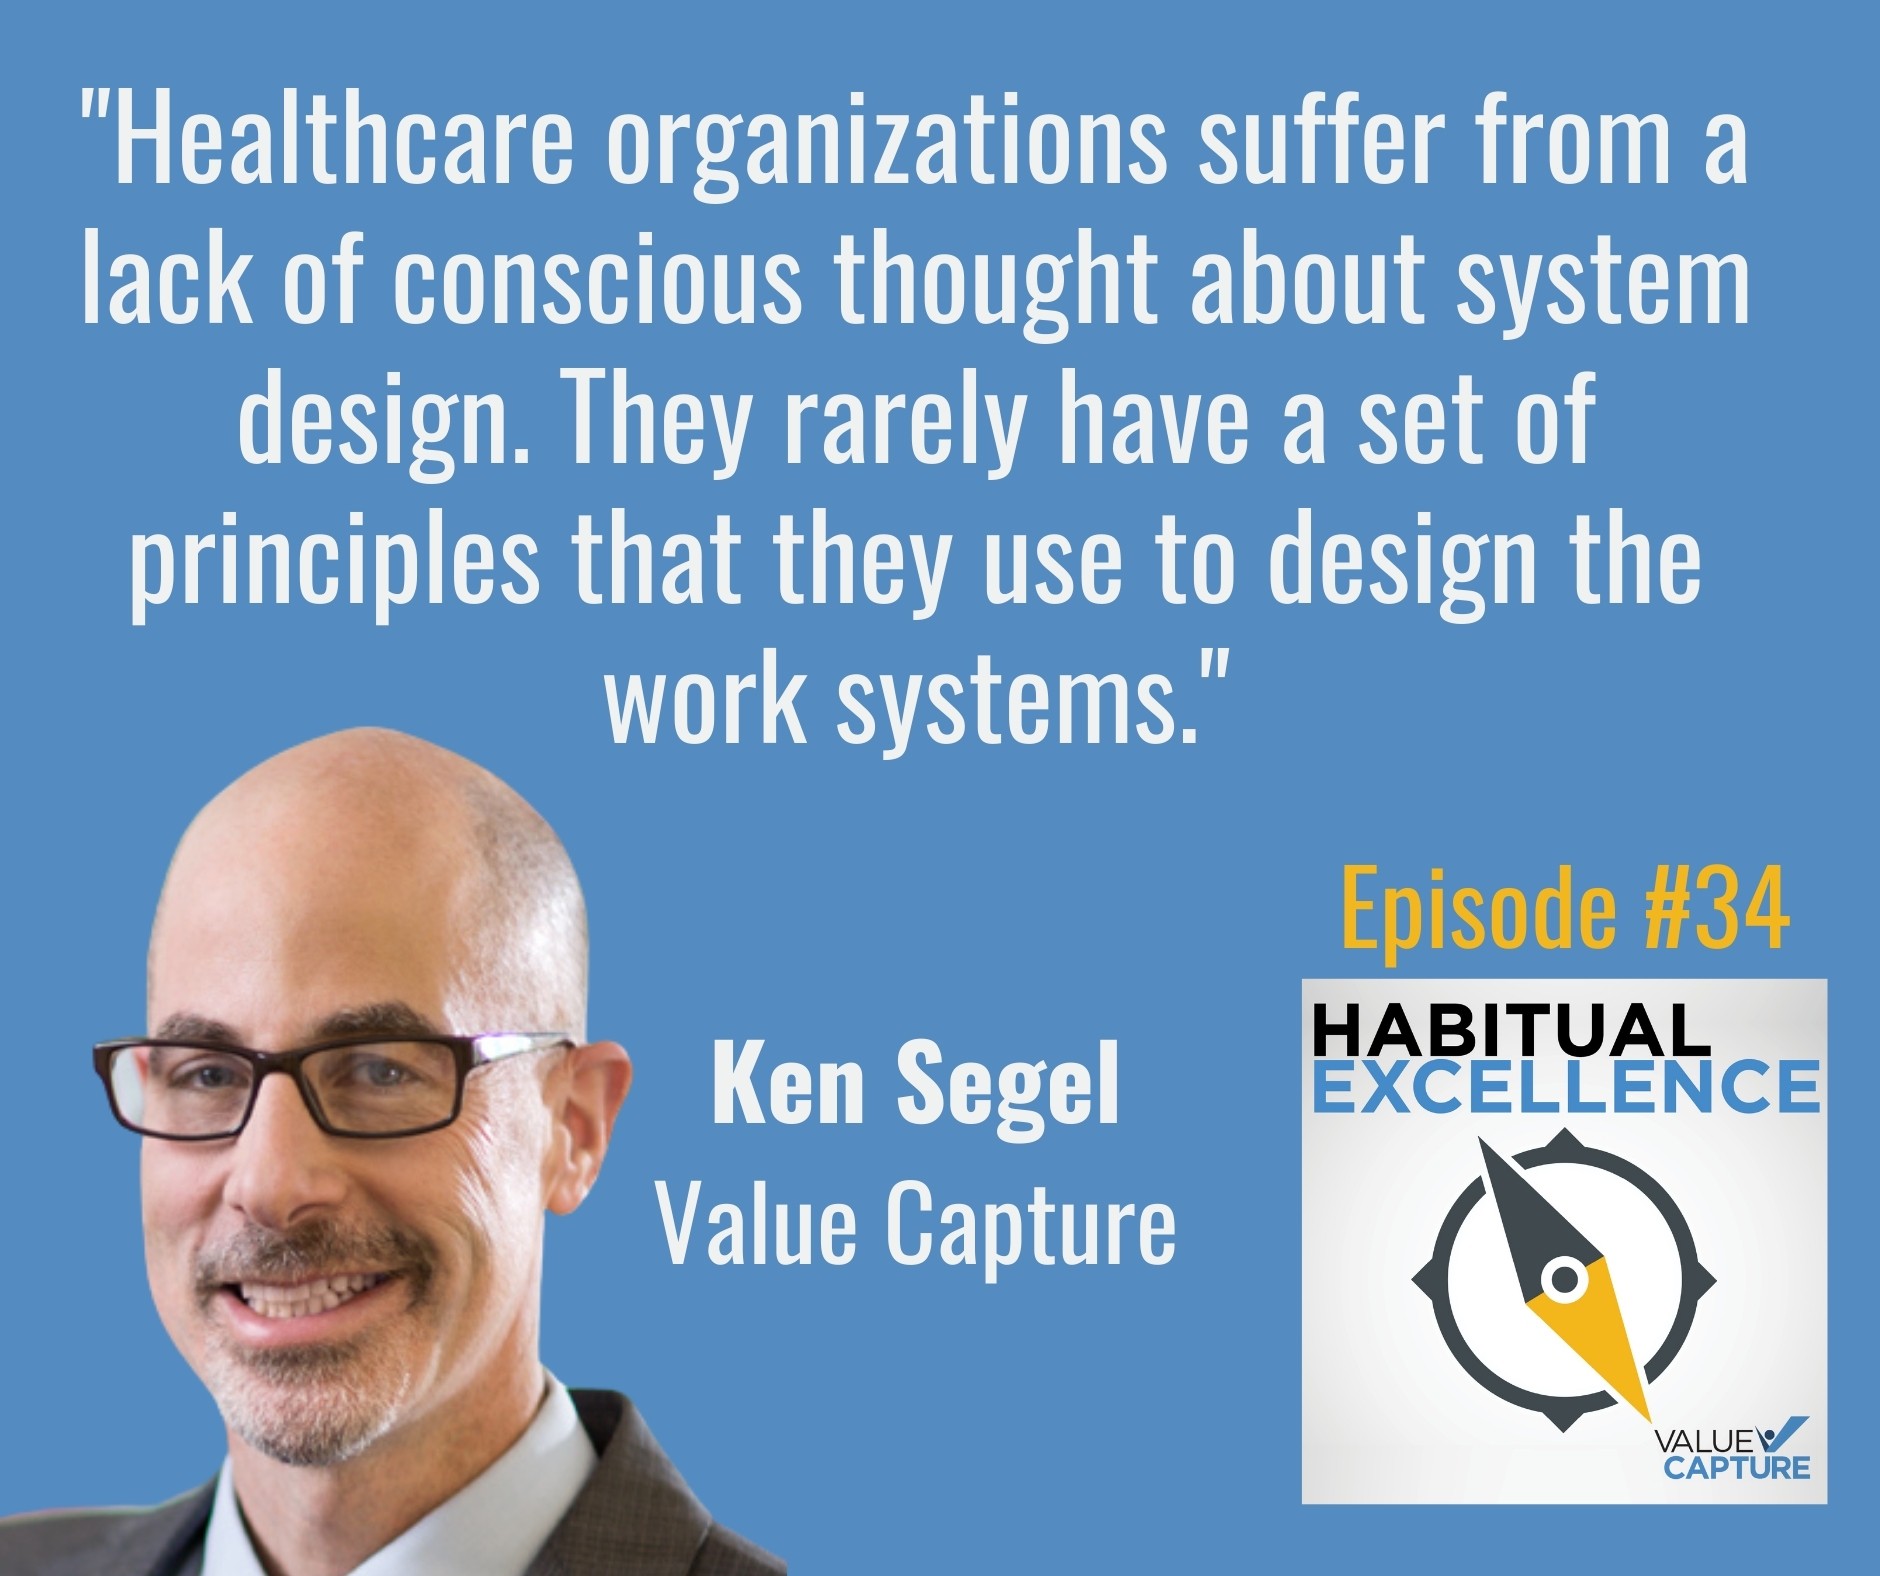 "Healthcare organizations suffer from a lack of conscious thought about system design. They rarely have a set of principles that they use to design the work systems."